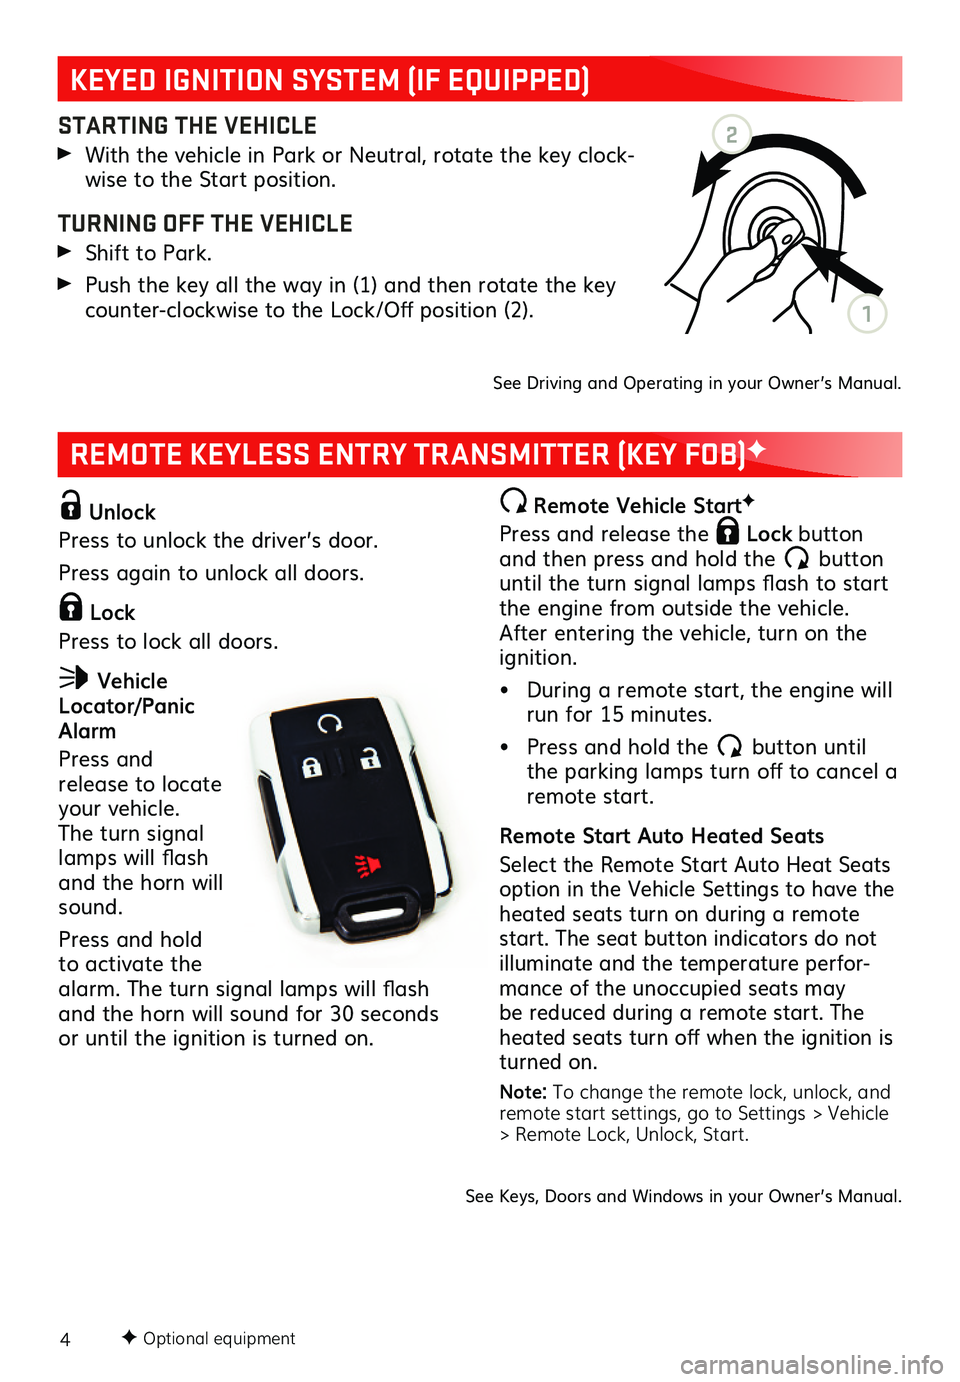 GMC CANYON 2019  Get To Know Guide 4
REMOTE KEYLESS ENTRY TRANSMITTER (KEY FOB)F
F Optional equipment
 Unlock
Press to unlock the driver’s door. 
Press again to unlock all doors.
 Lock 
Press to lock all doors. 
 Vehicle Locator/Pani